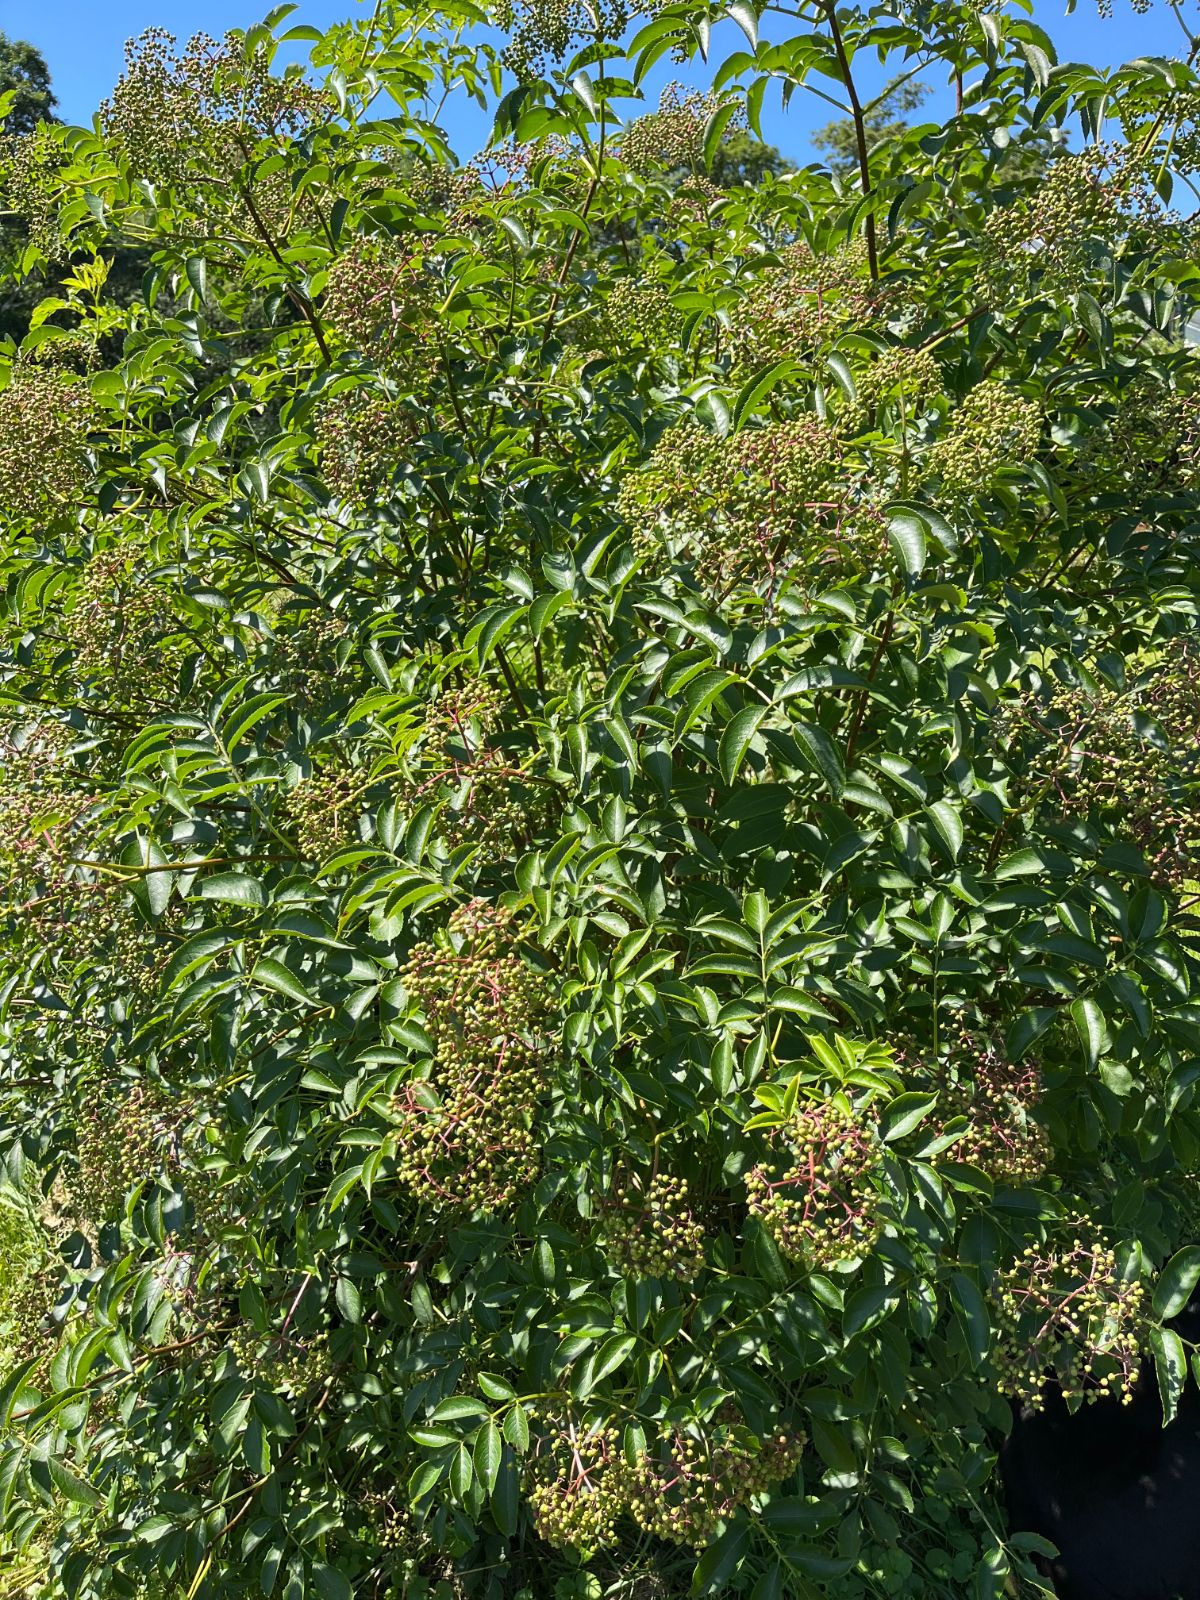 An elderberry bush with berries ready to ripen